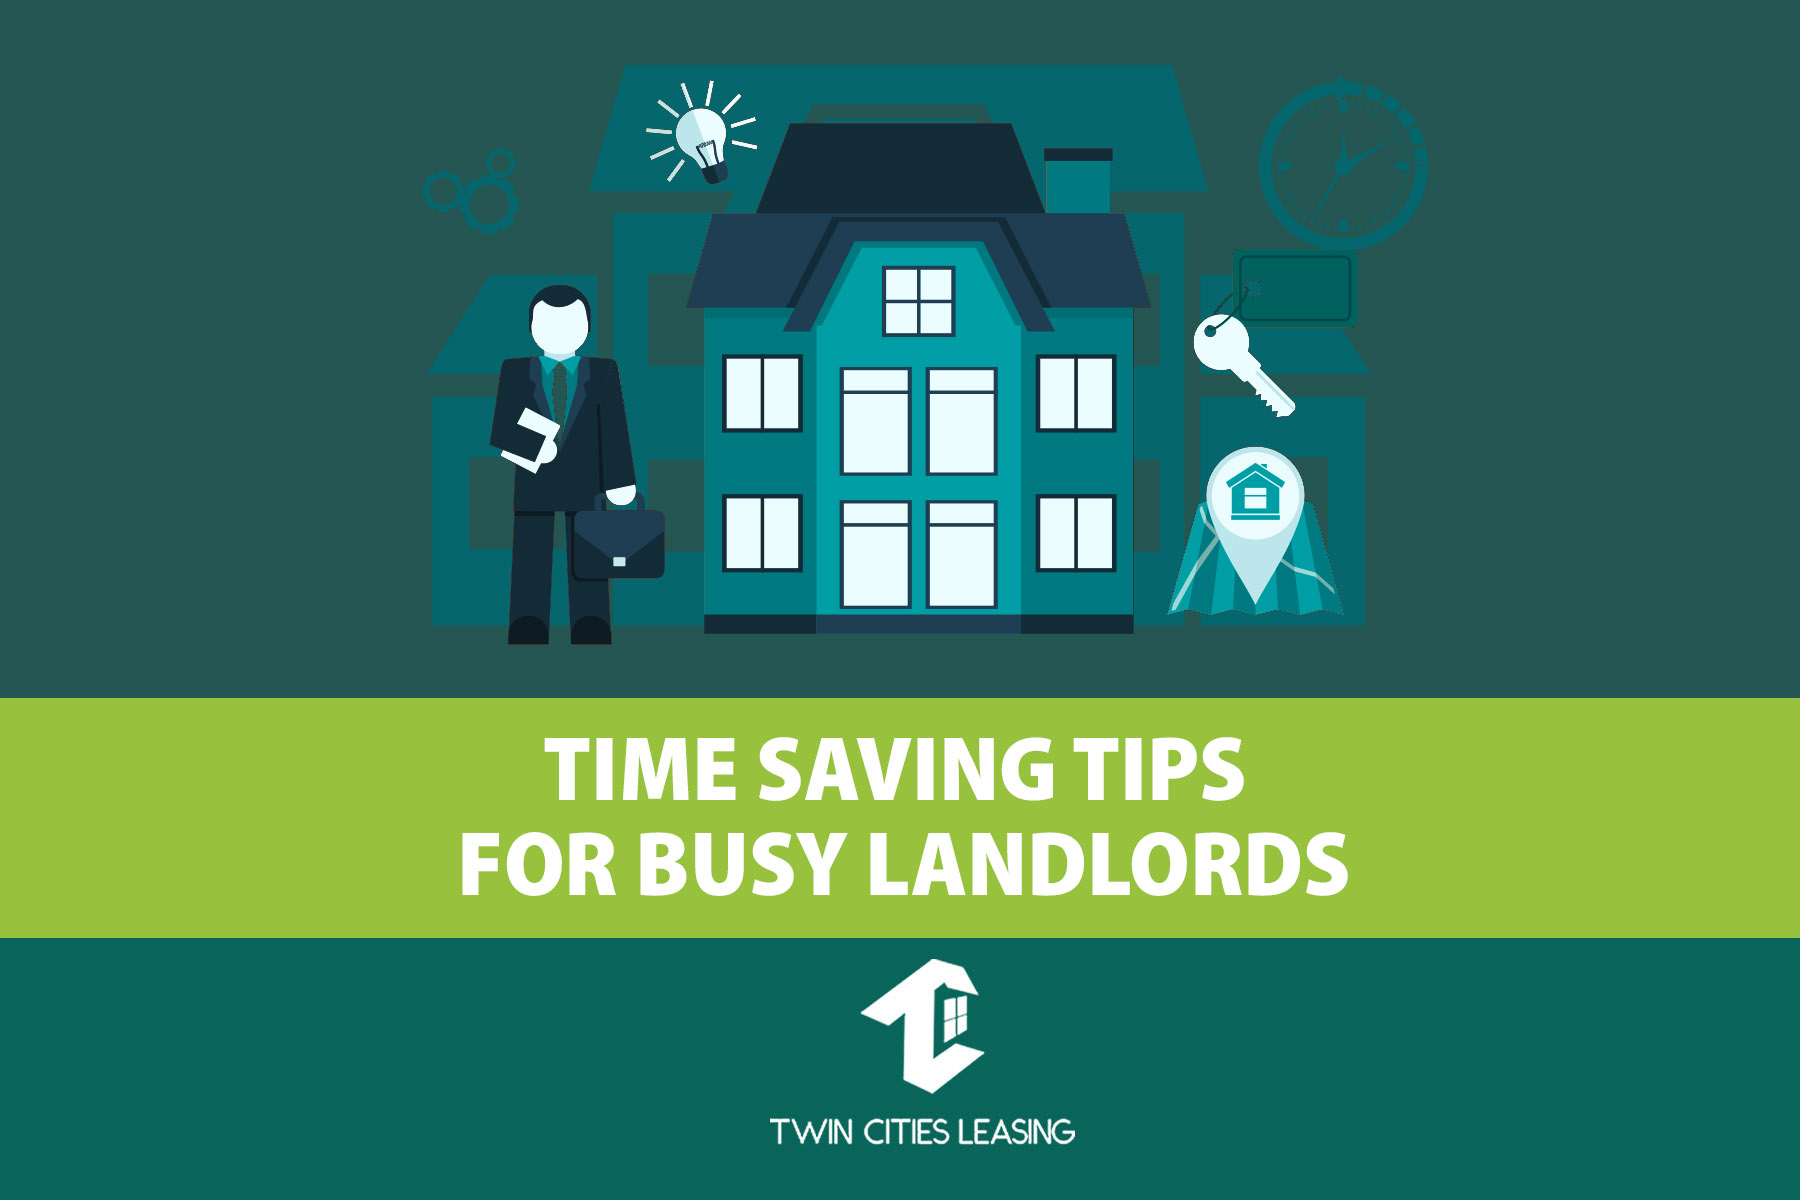 Time Saving Tips for Busy Landlords in the Twin Cities